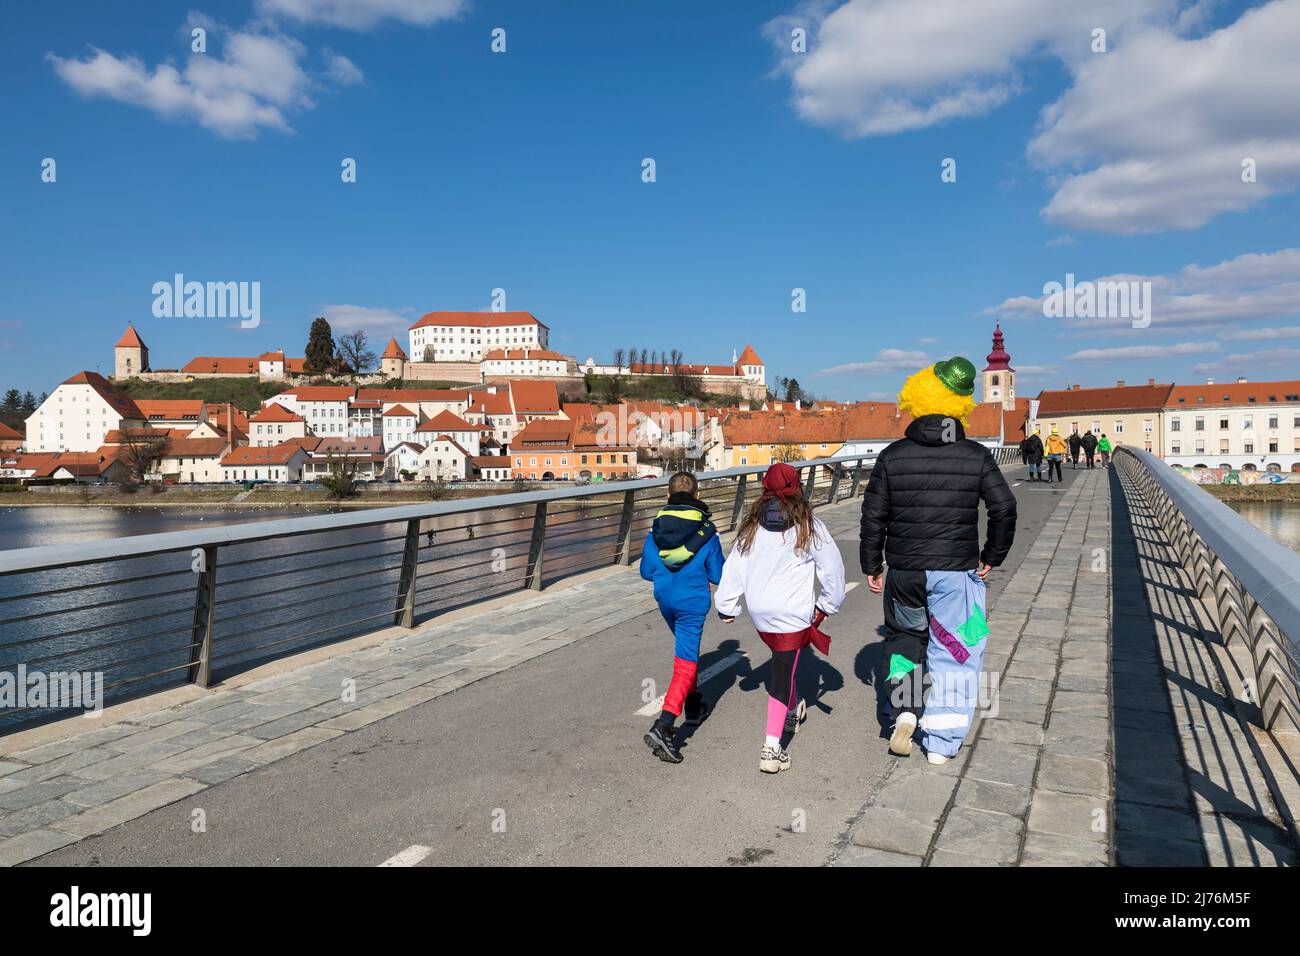 Town Ptuj (Pettau) with castle hill, dressed up people go to carnival, Lower Styria, Podravska, Slovenia, Europe Stock Photo